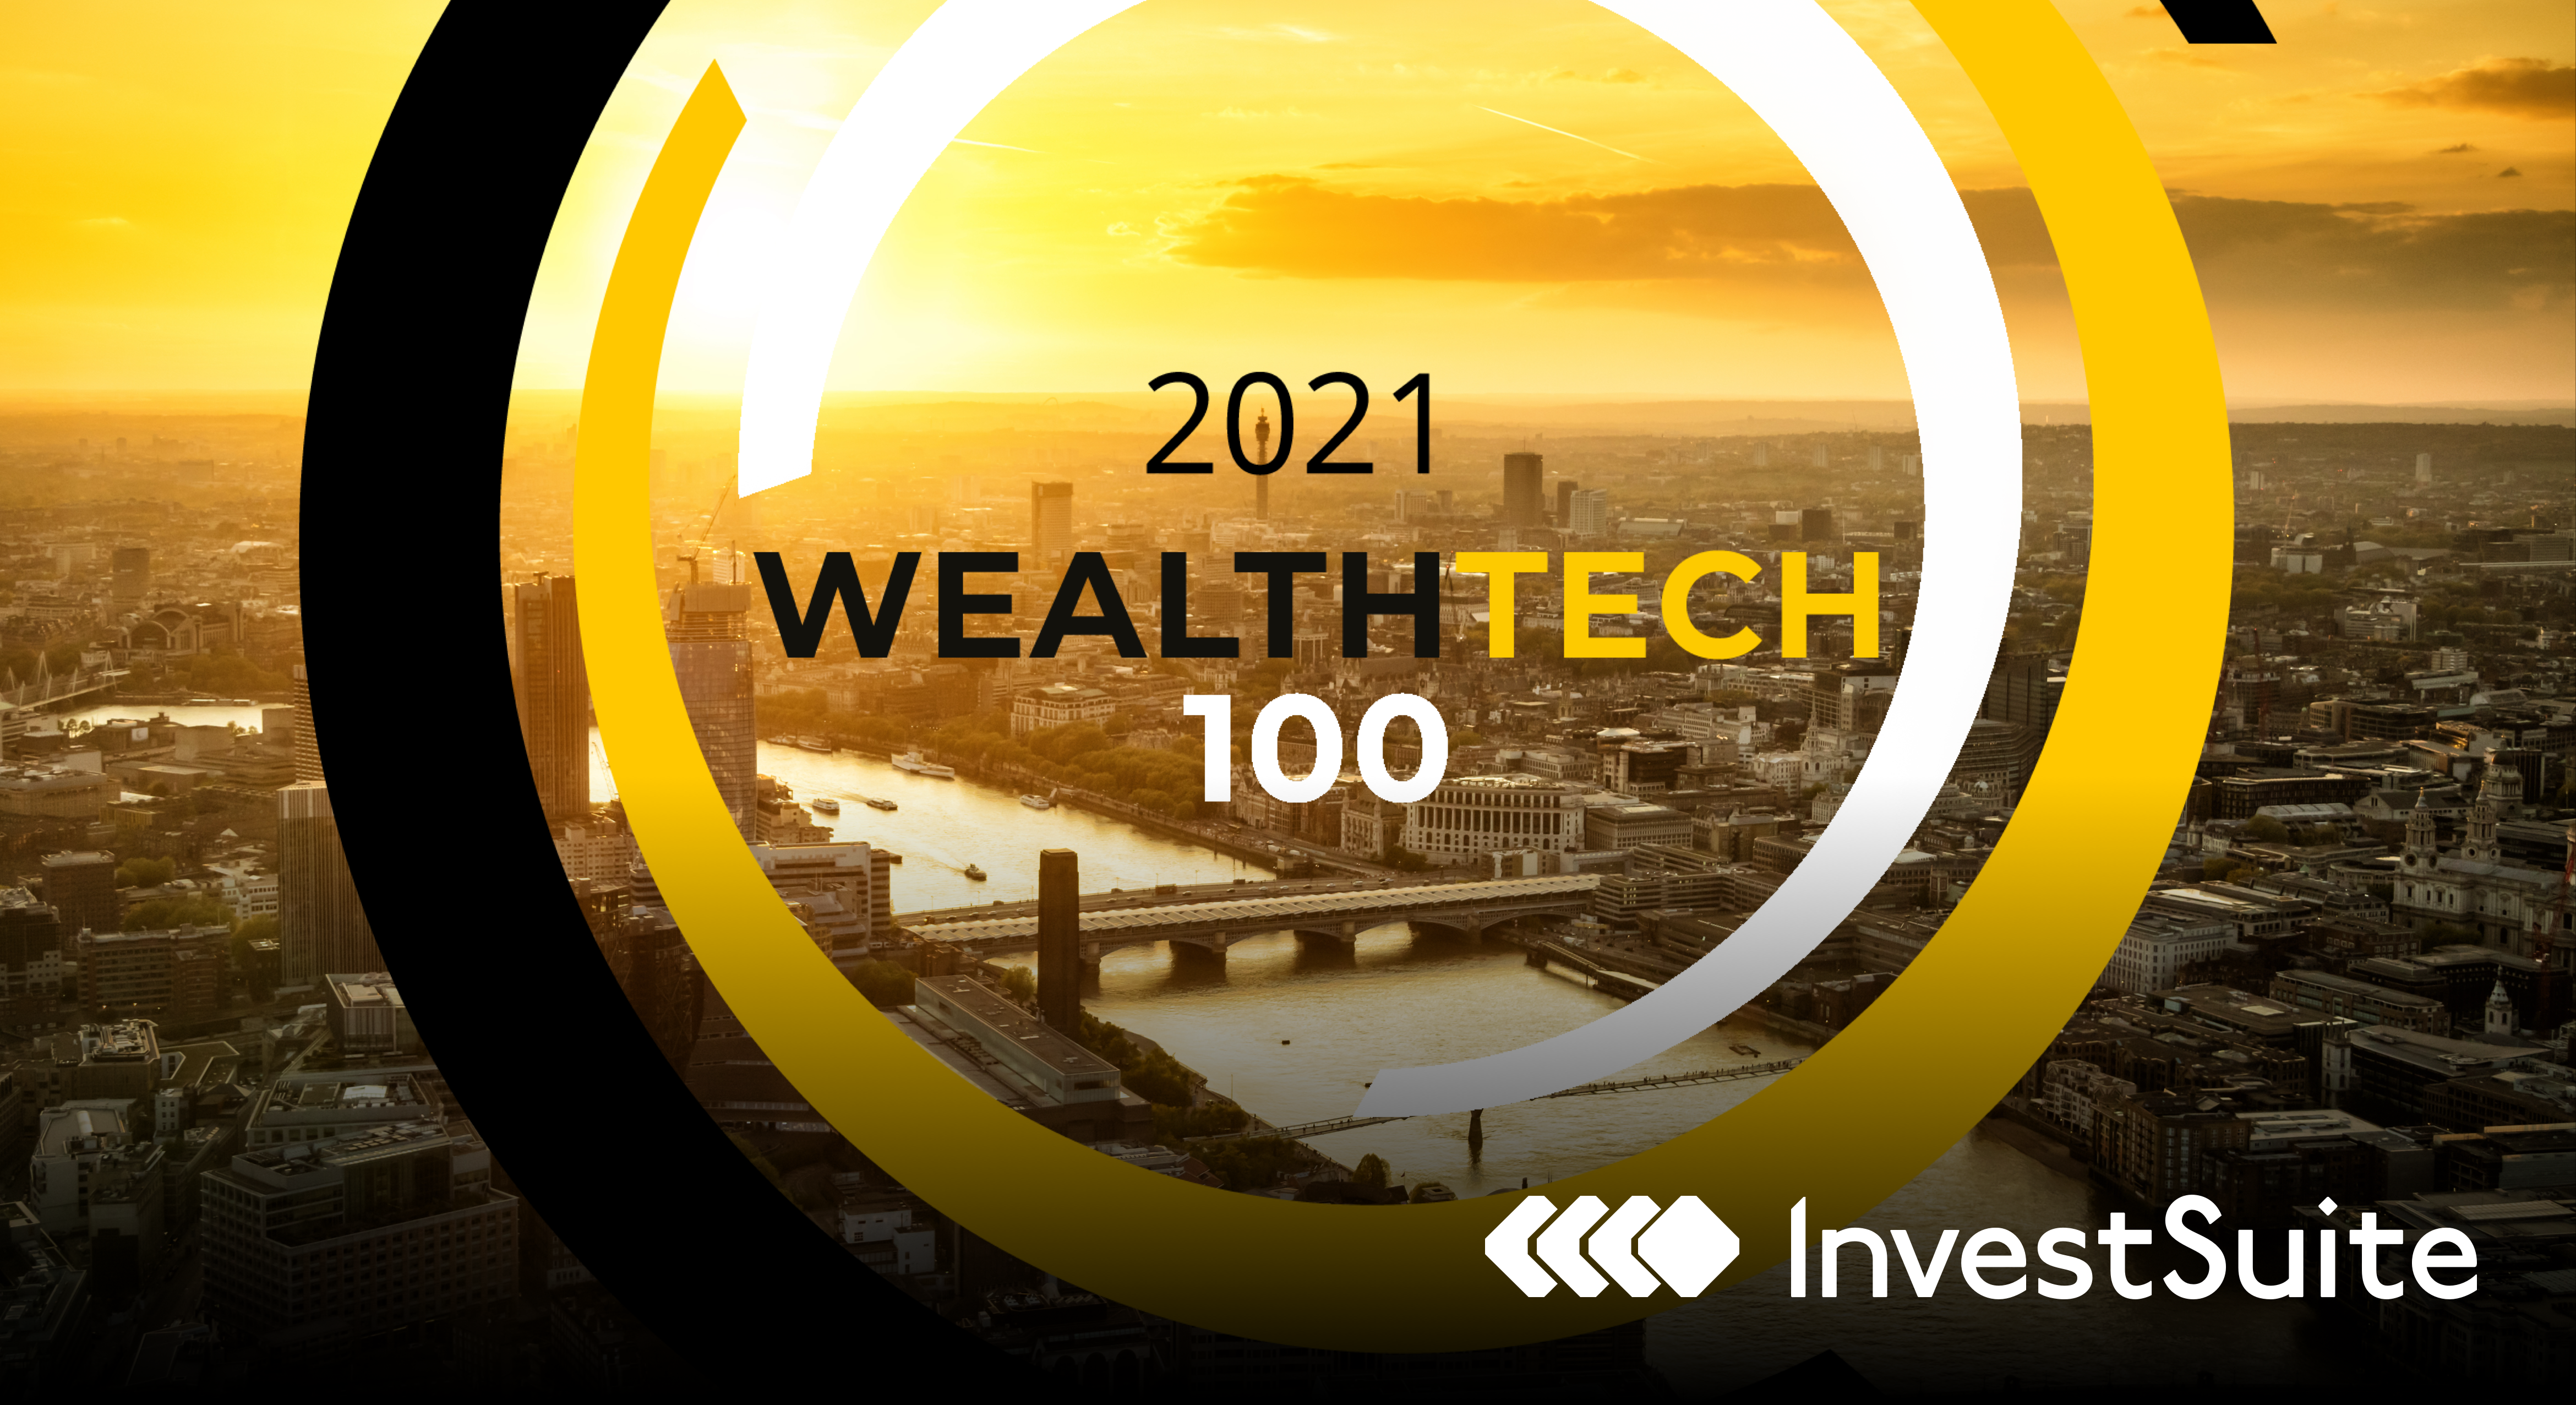 InvestSuite recognised as one of the world’s most innovative WealthTech companies